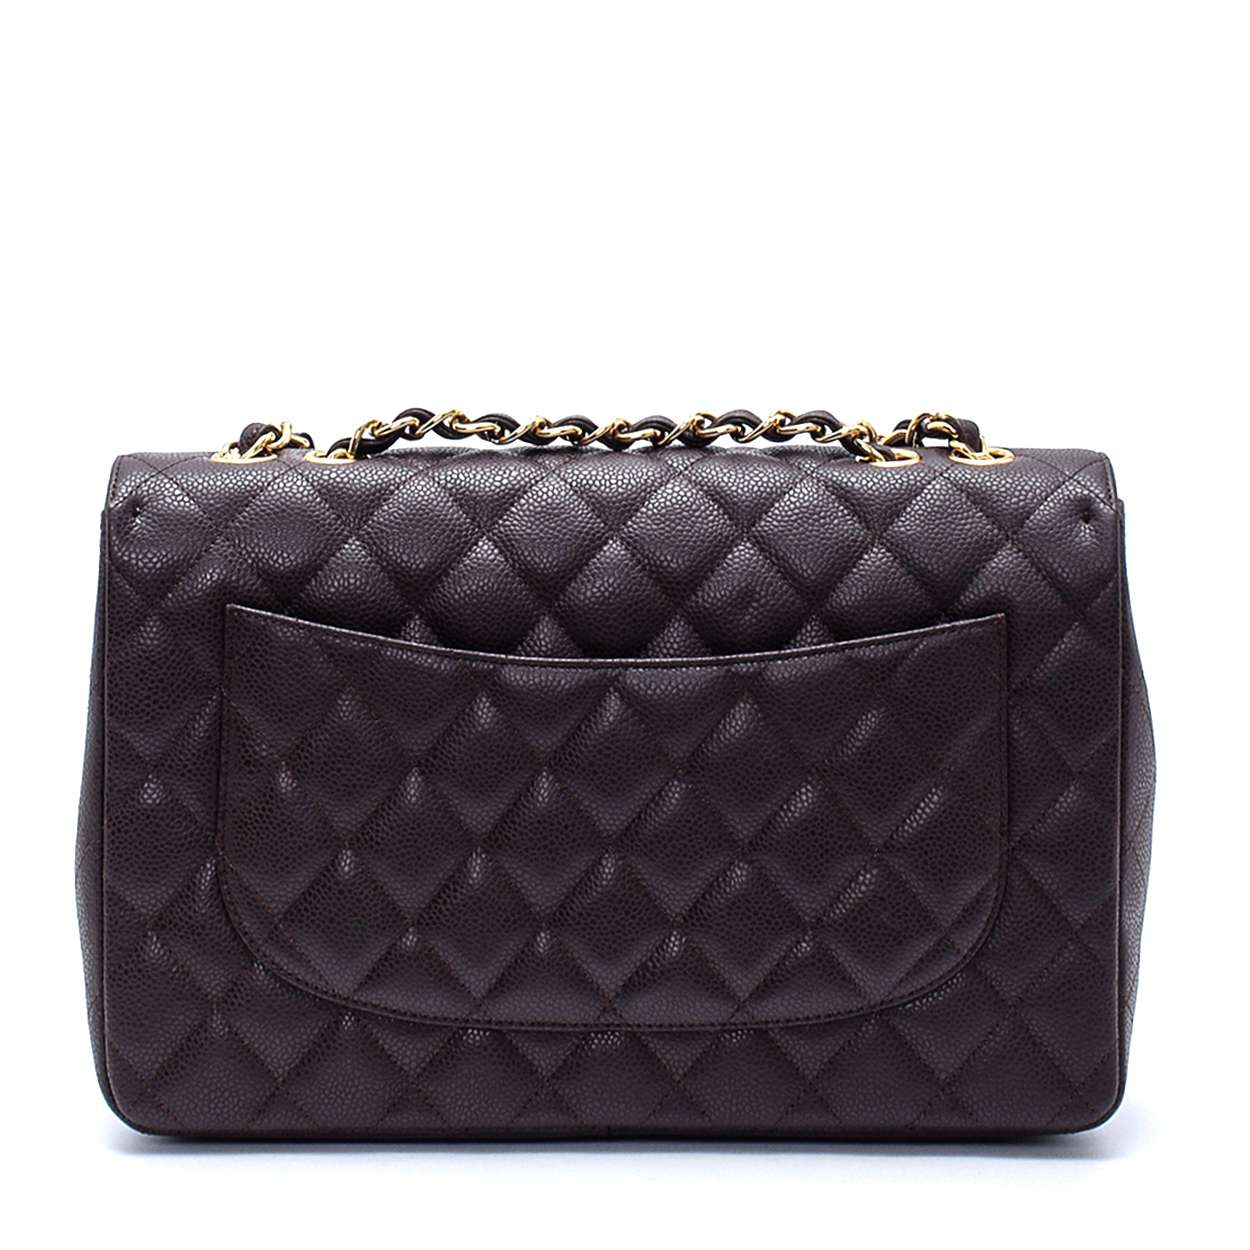 Chanel - Dark Brown Caviar Leather Quilted Single Jumbo Flap Bag